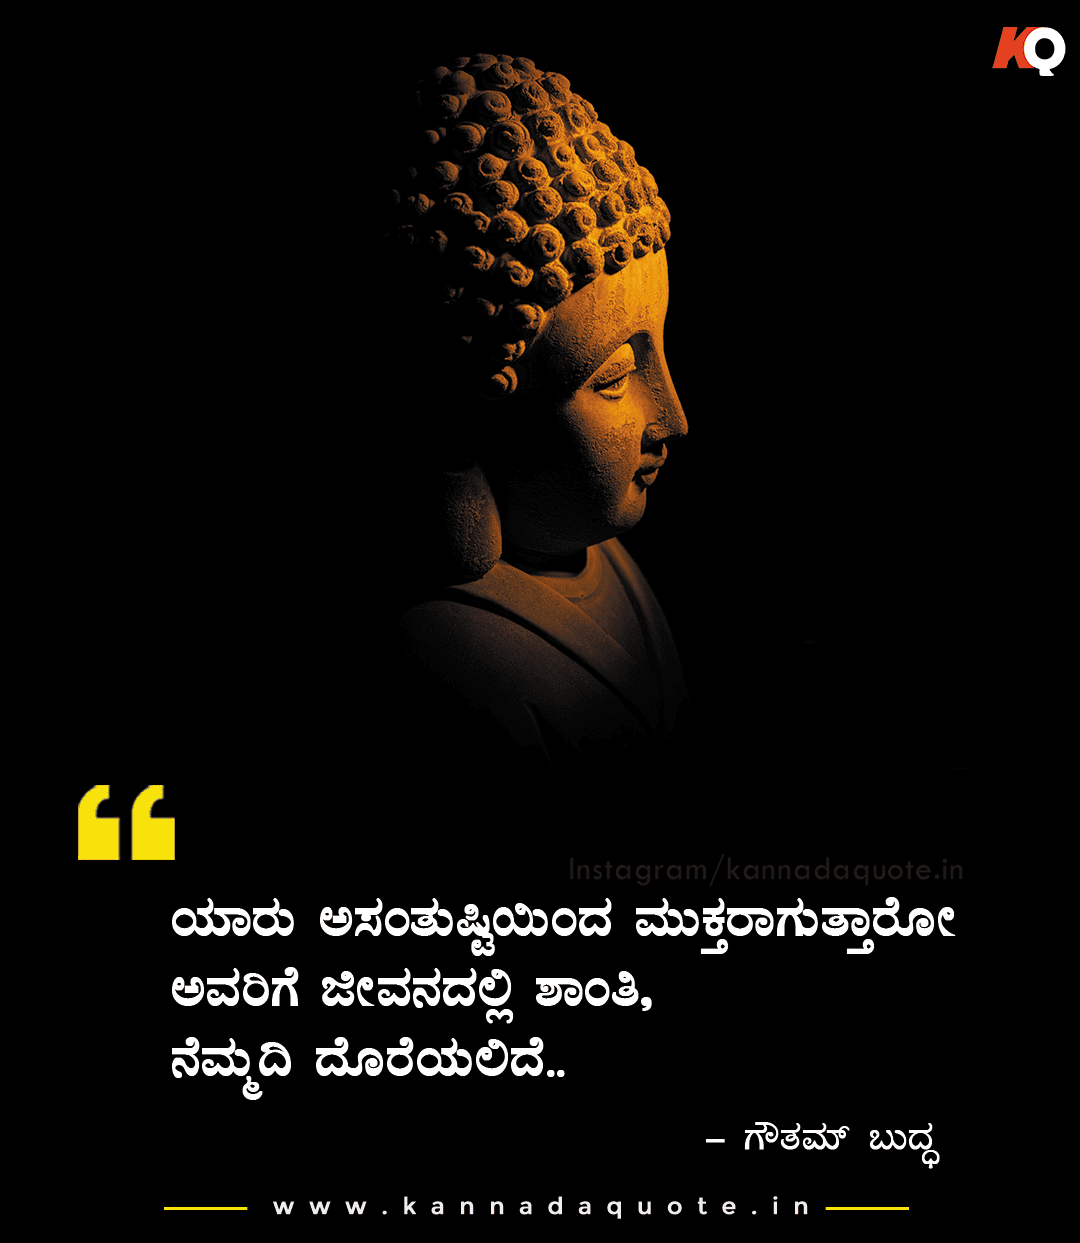 Life Inspirational Buddha quotes in Kannada with image